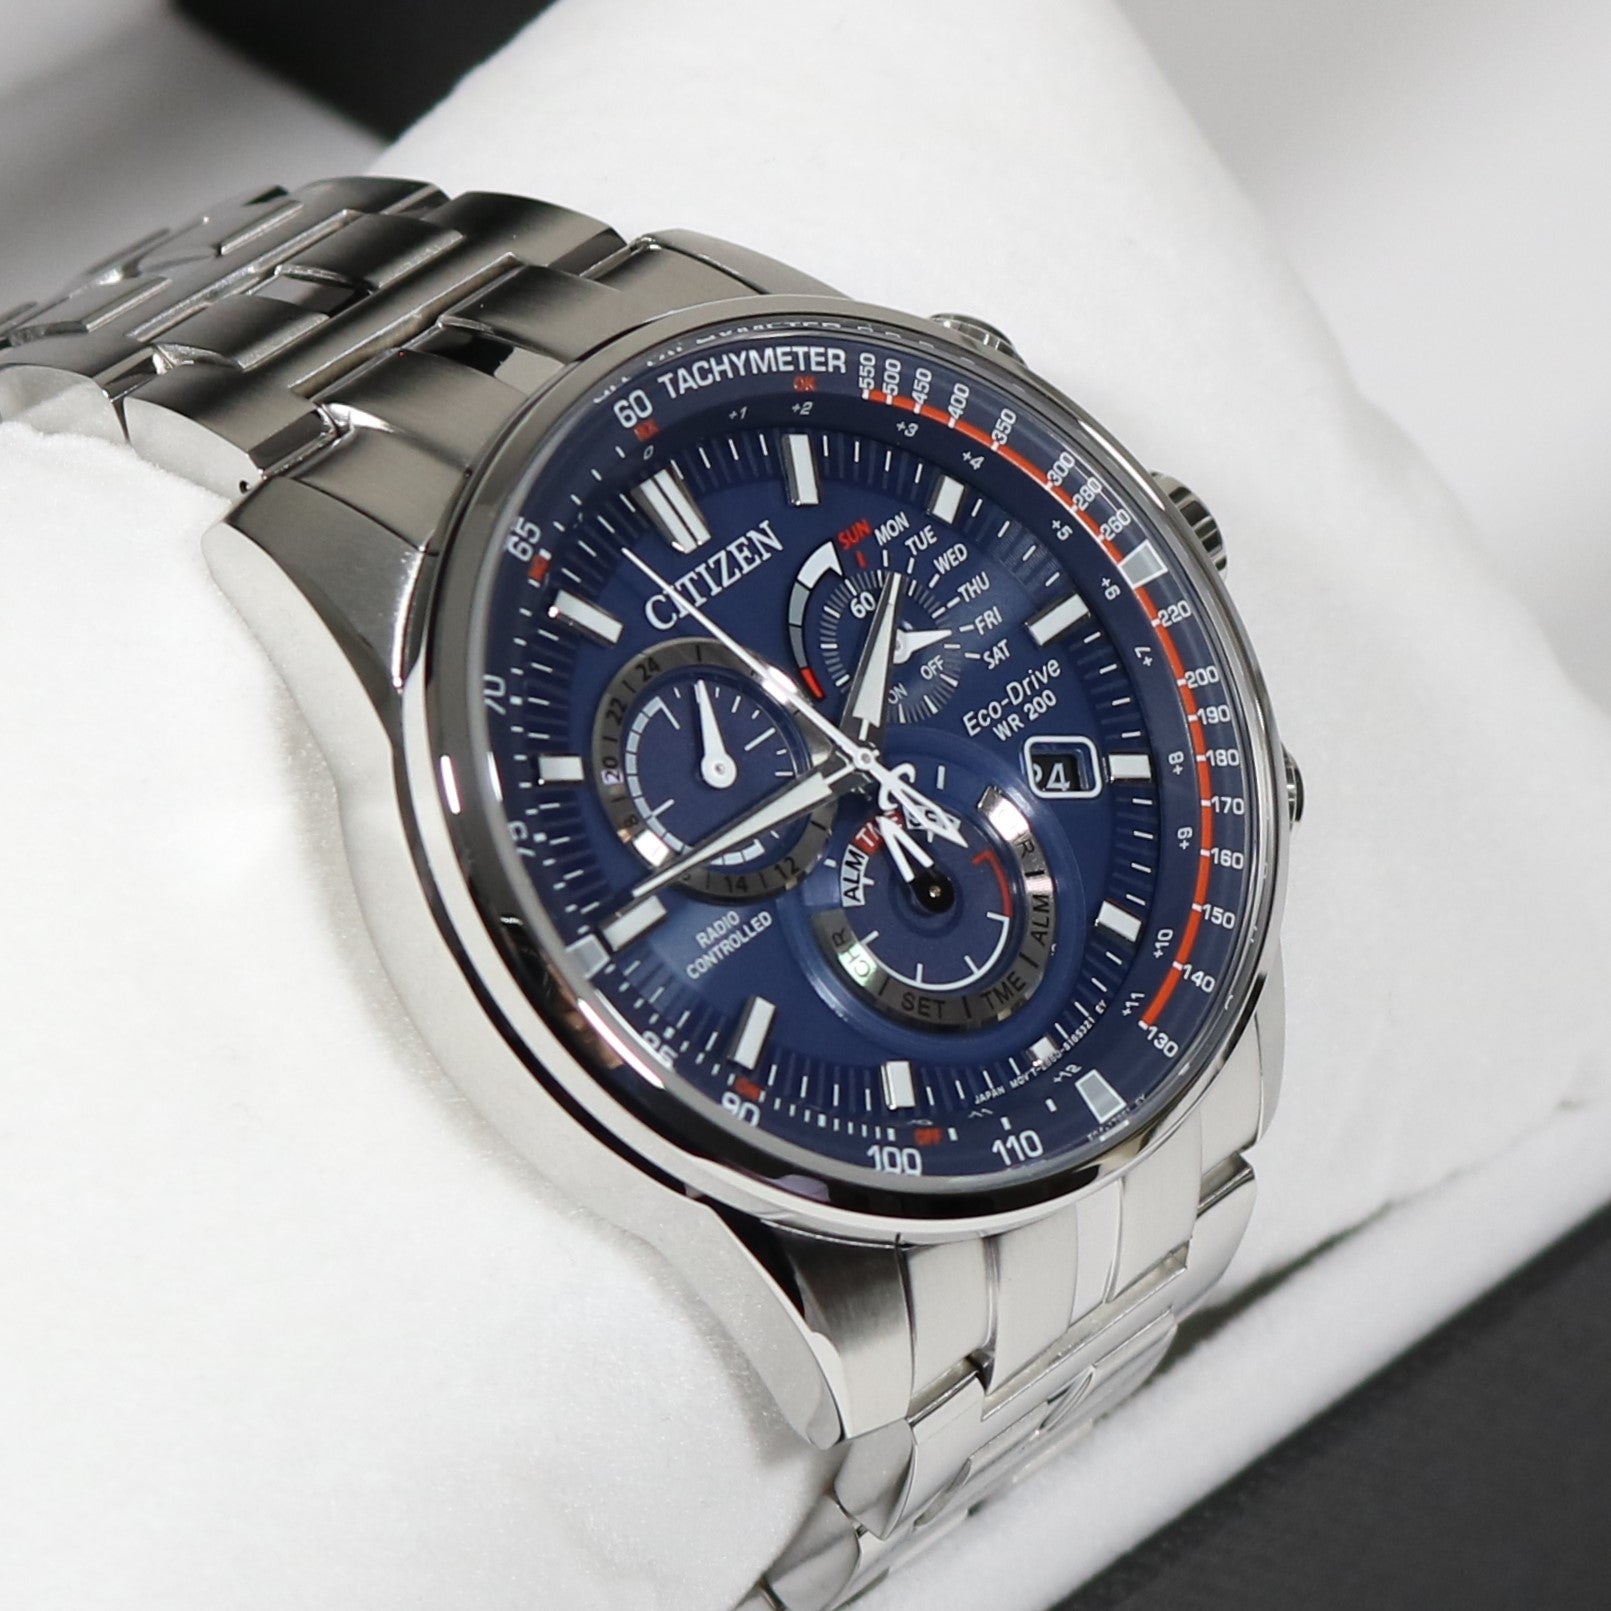 Dial – Chronograph PCAT Eco-Drive Controlled CB5880-5 Blue Watch Chronobuy Citizen